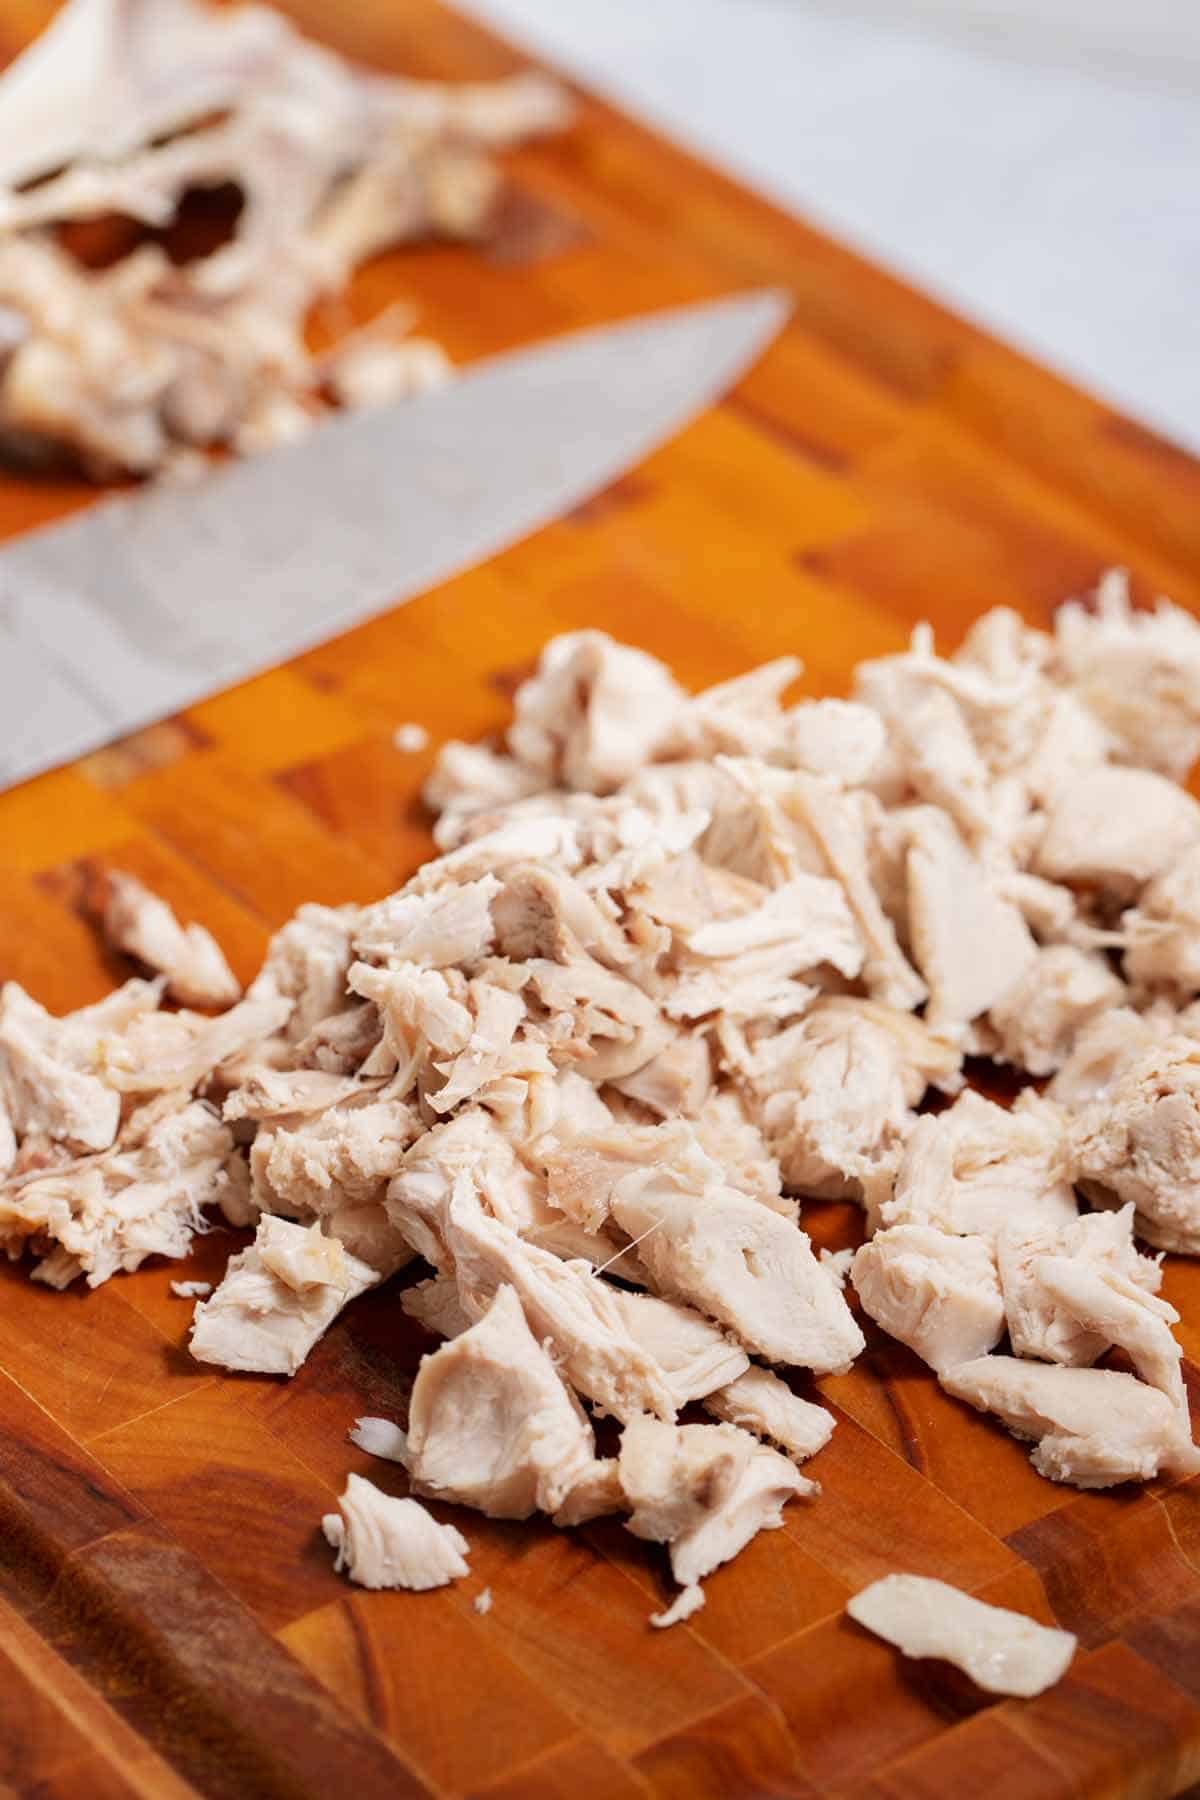 Cutting board with cut pieces of chicken that has been cooked in the Instant Pot.